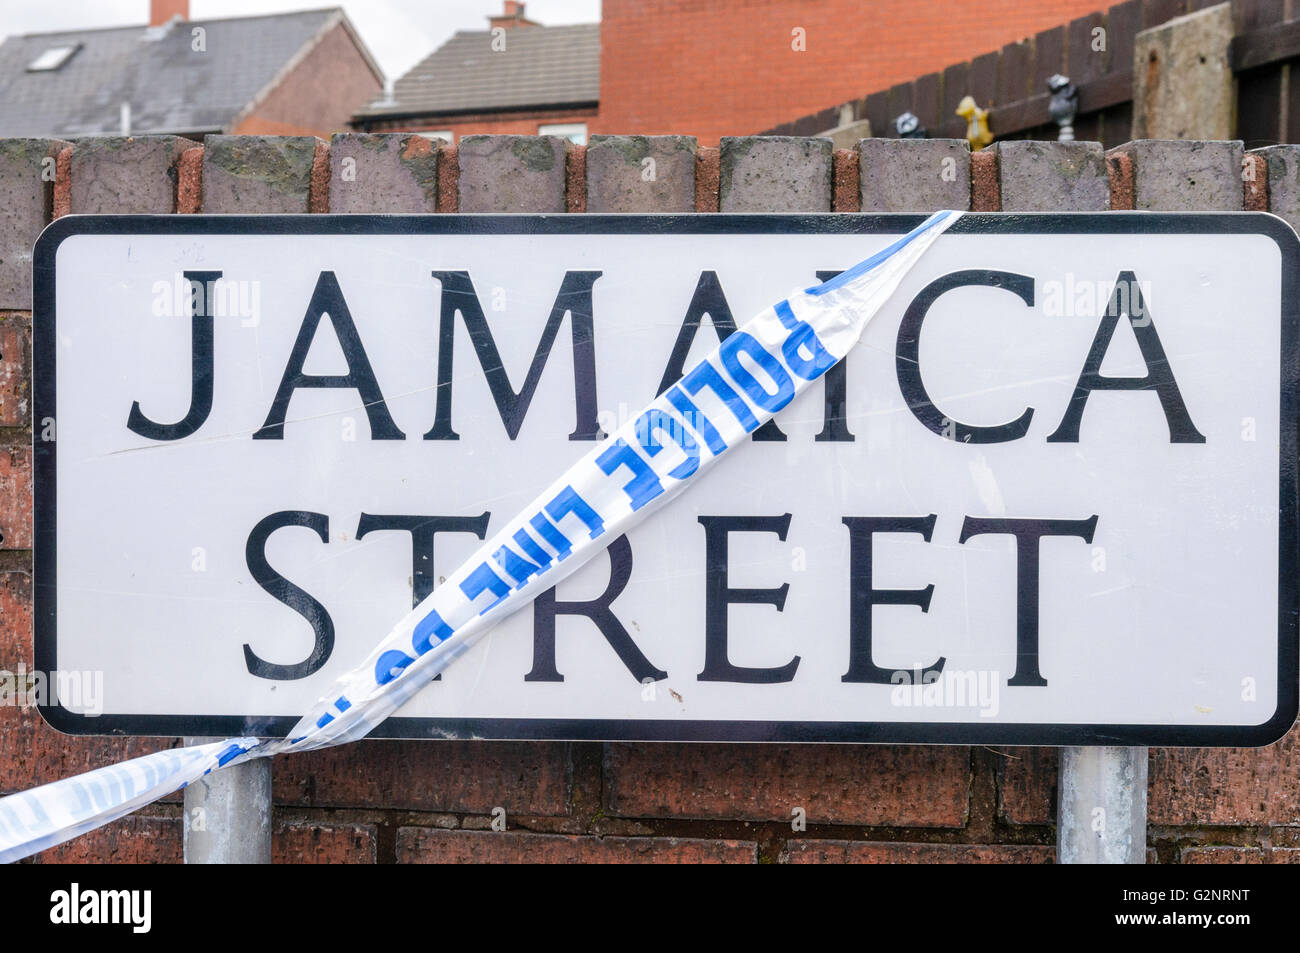 Belfast, 04/10/2012 - PSNI tape is used to close Jamaica Street in the Ardoyne area of Belfast in a police operation Stock Photo